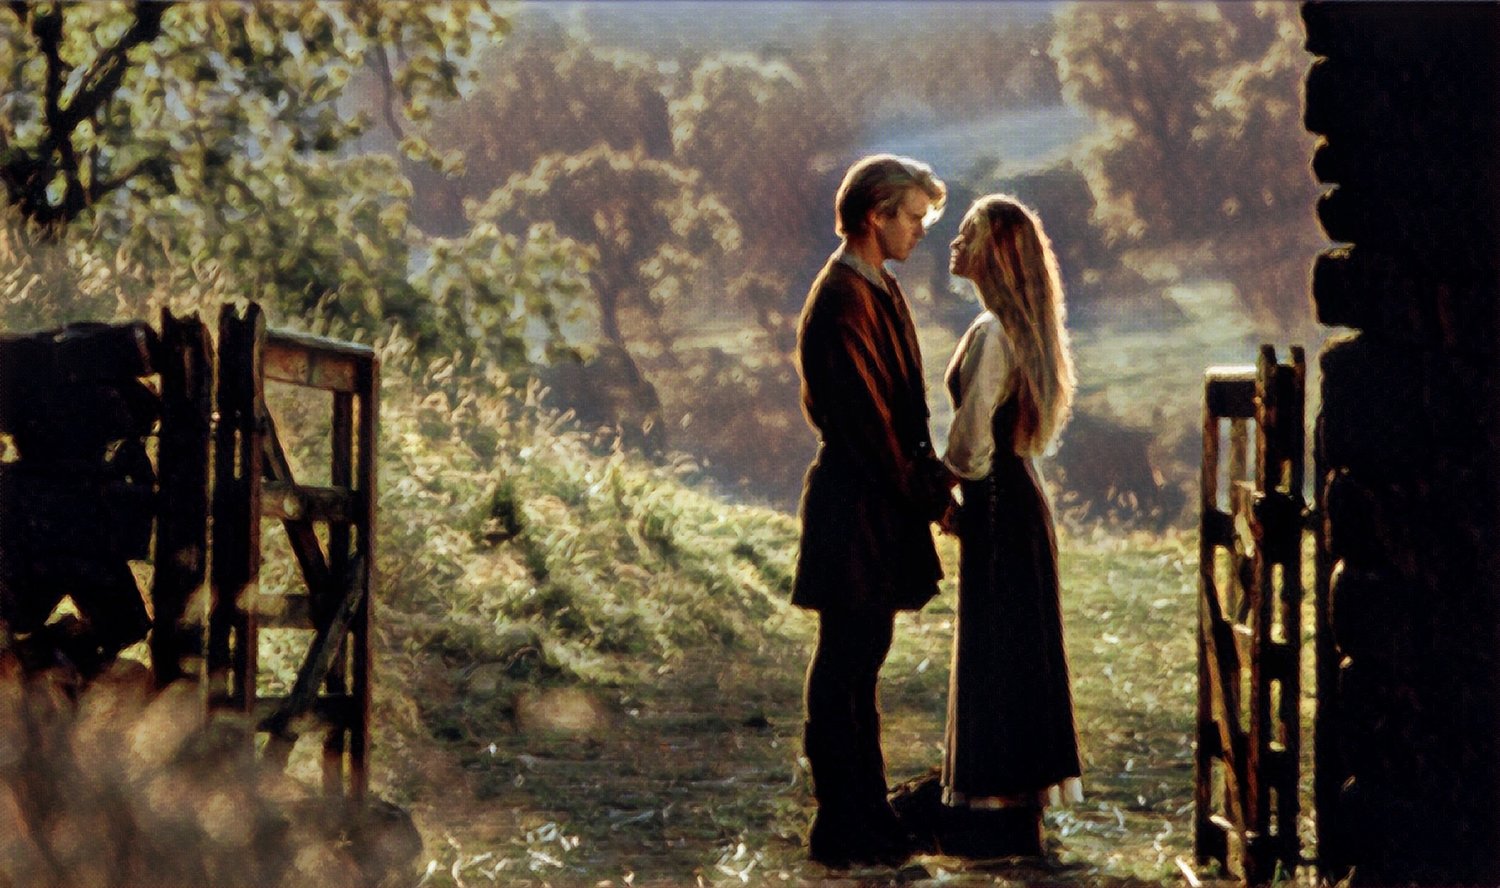 The Princess Bride, minutes 0 to 2